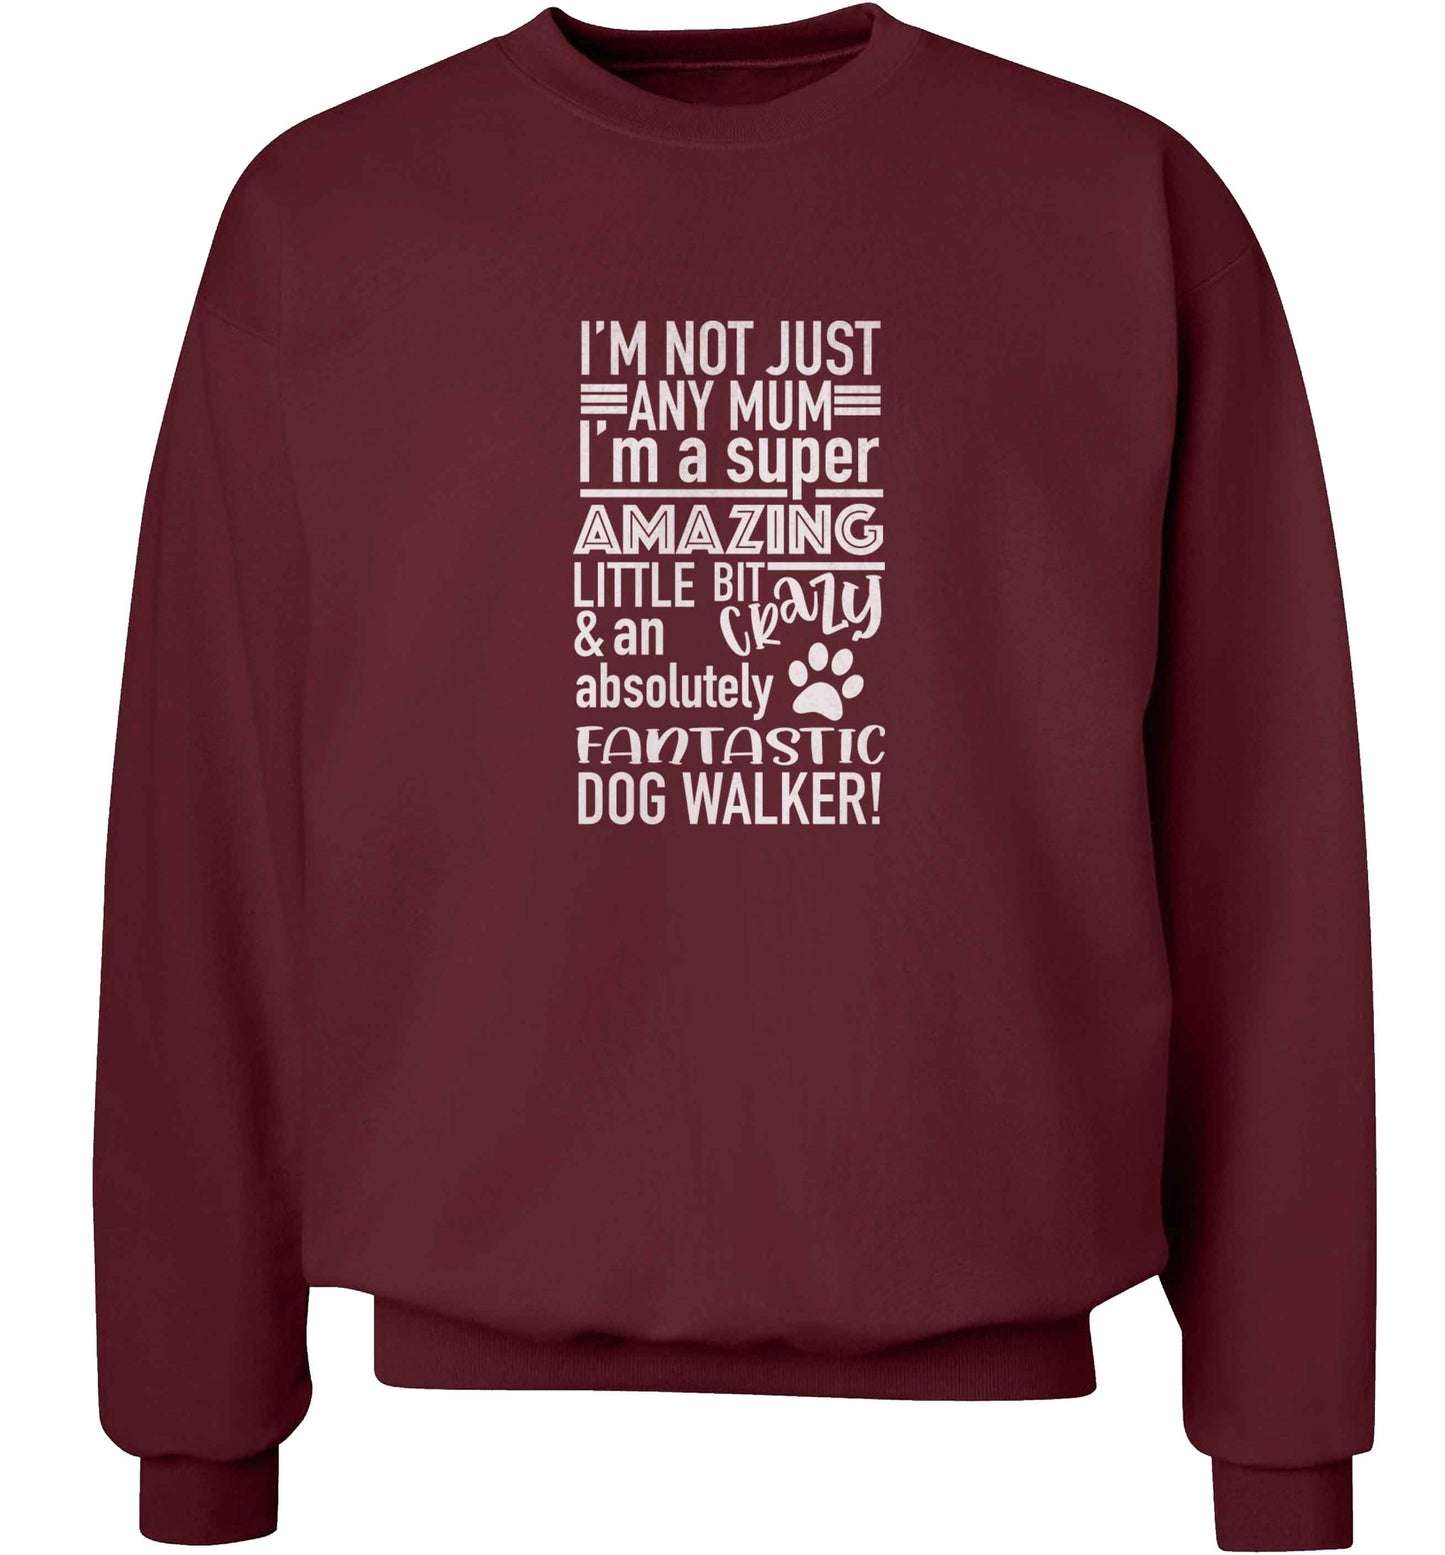 I'm not just any mum I'm a super amazing little bit crazy and an absolutely fantastic dog walker! adult's unisex maroon sweater 2XL